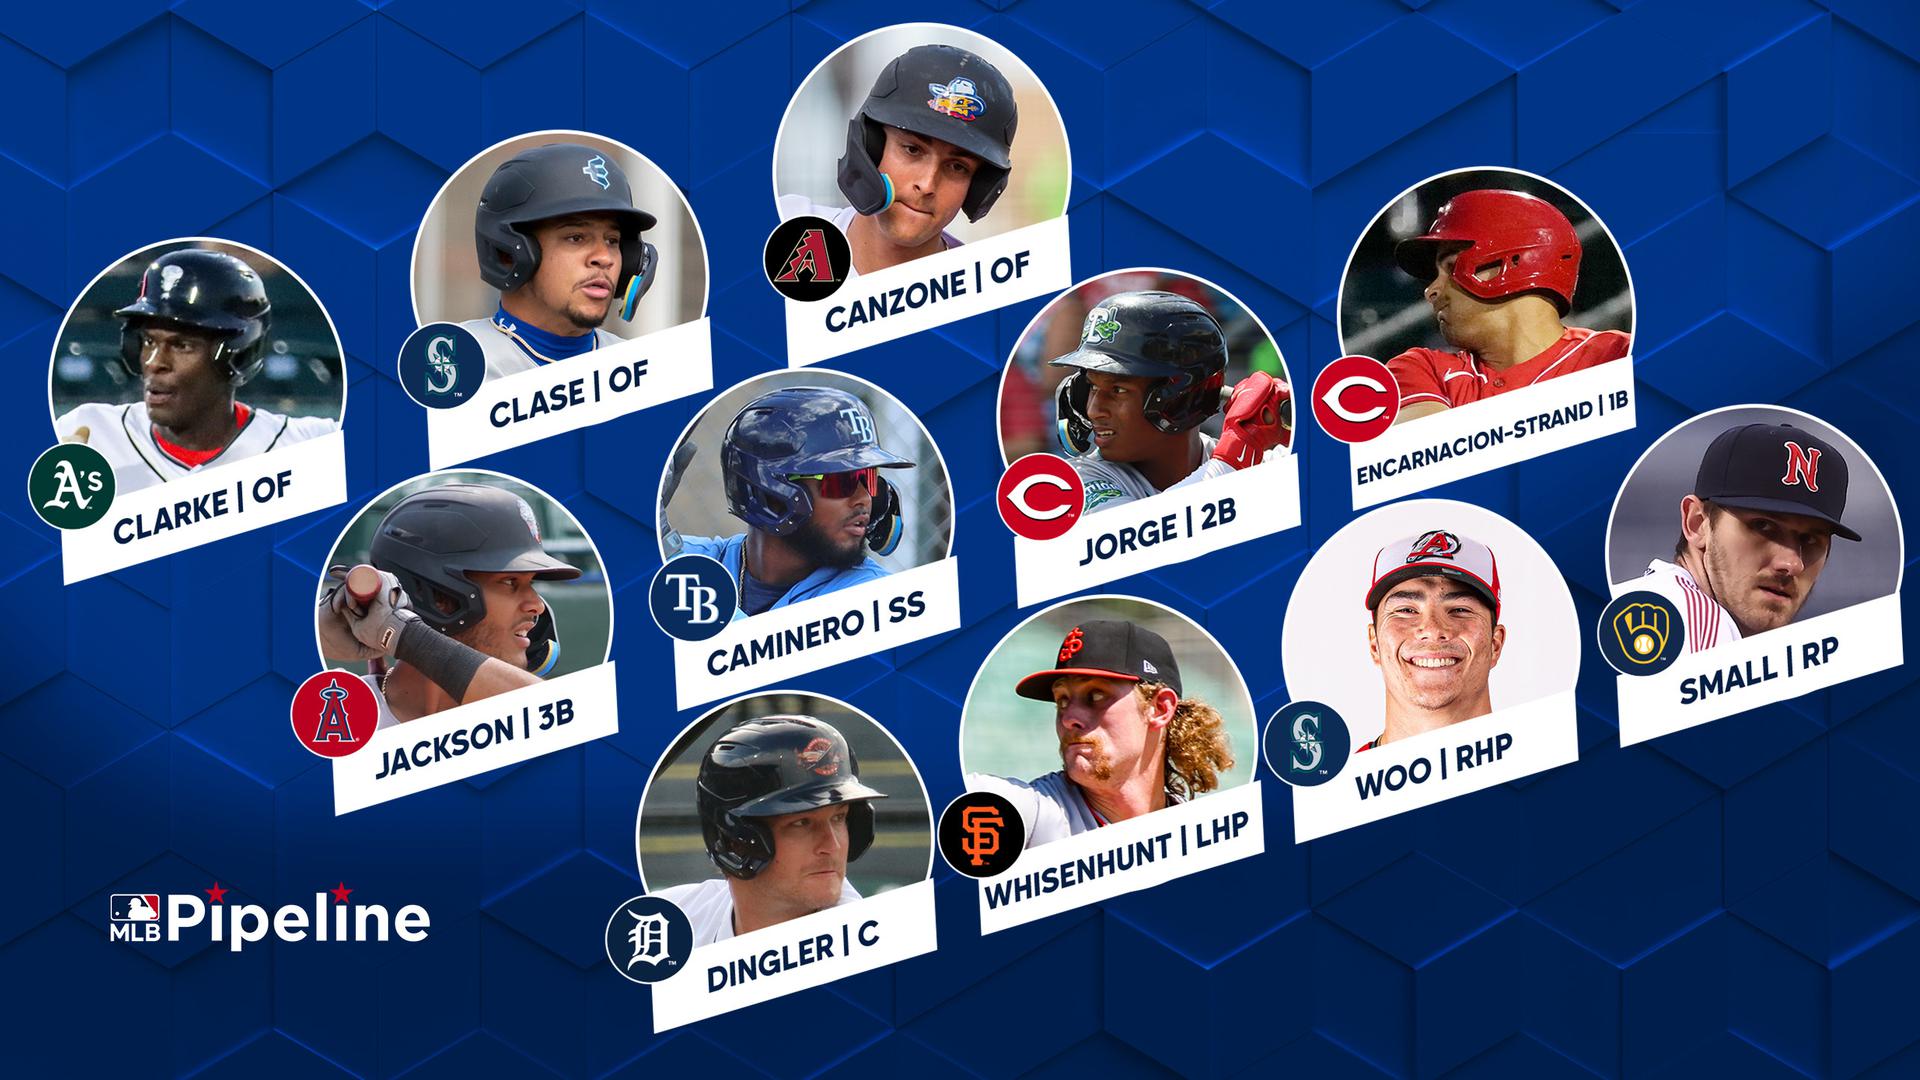 Head shots for 11 players are shown next to the MLB Pipeline logo